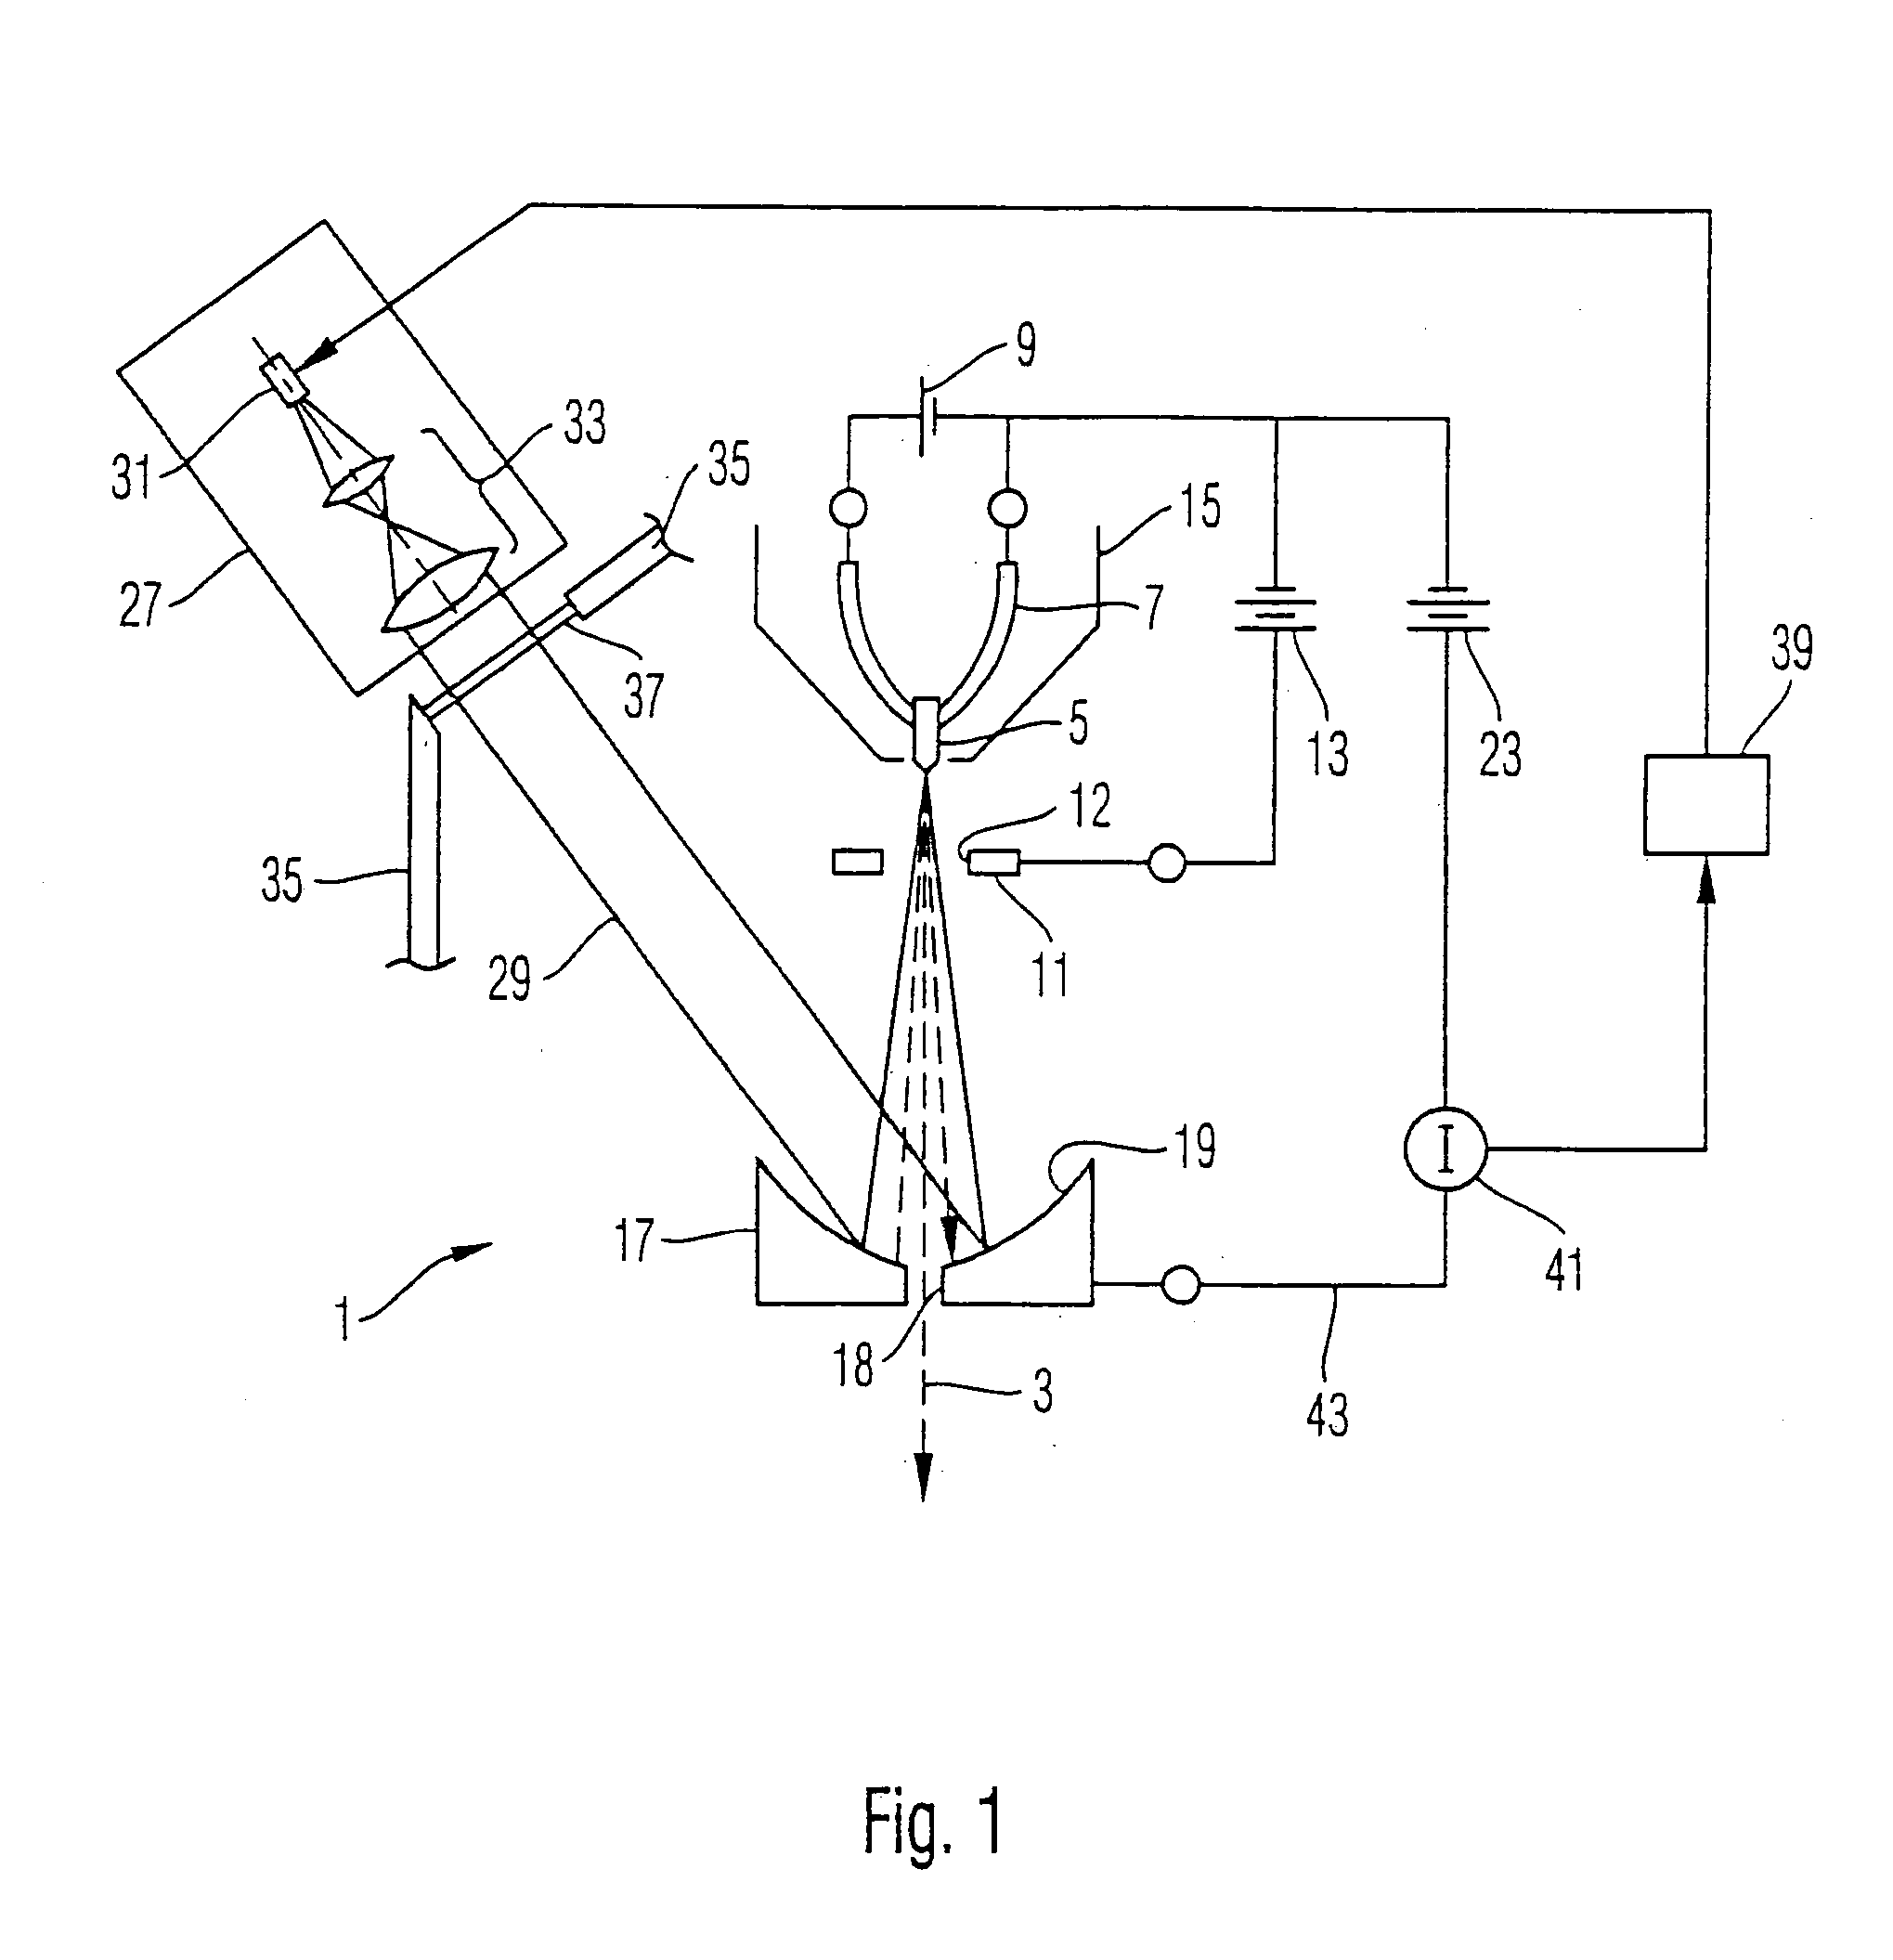 Electron beam source, electron optical apparatus using such beam source and method of operating an electron beam source